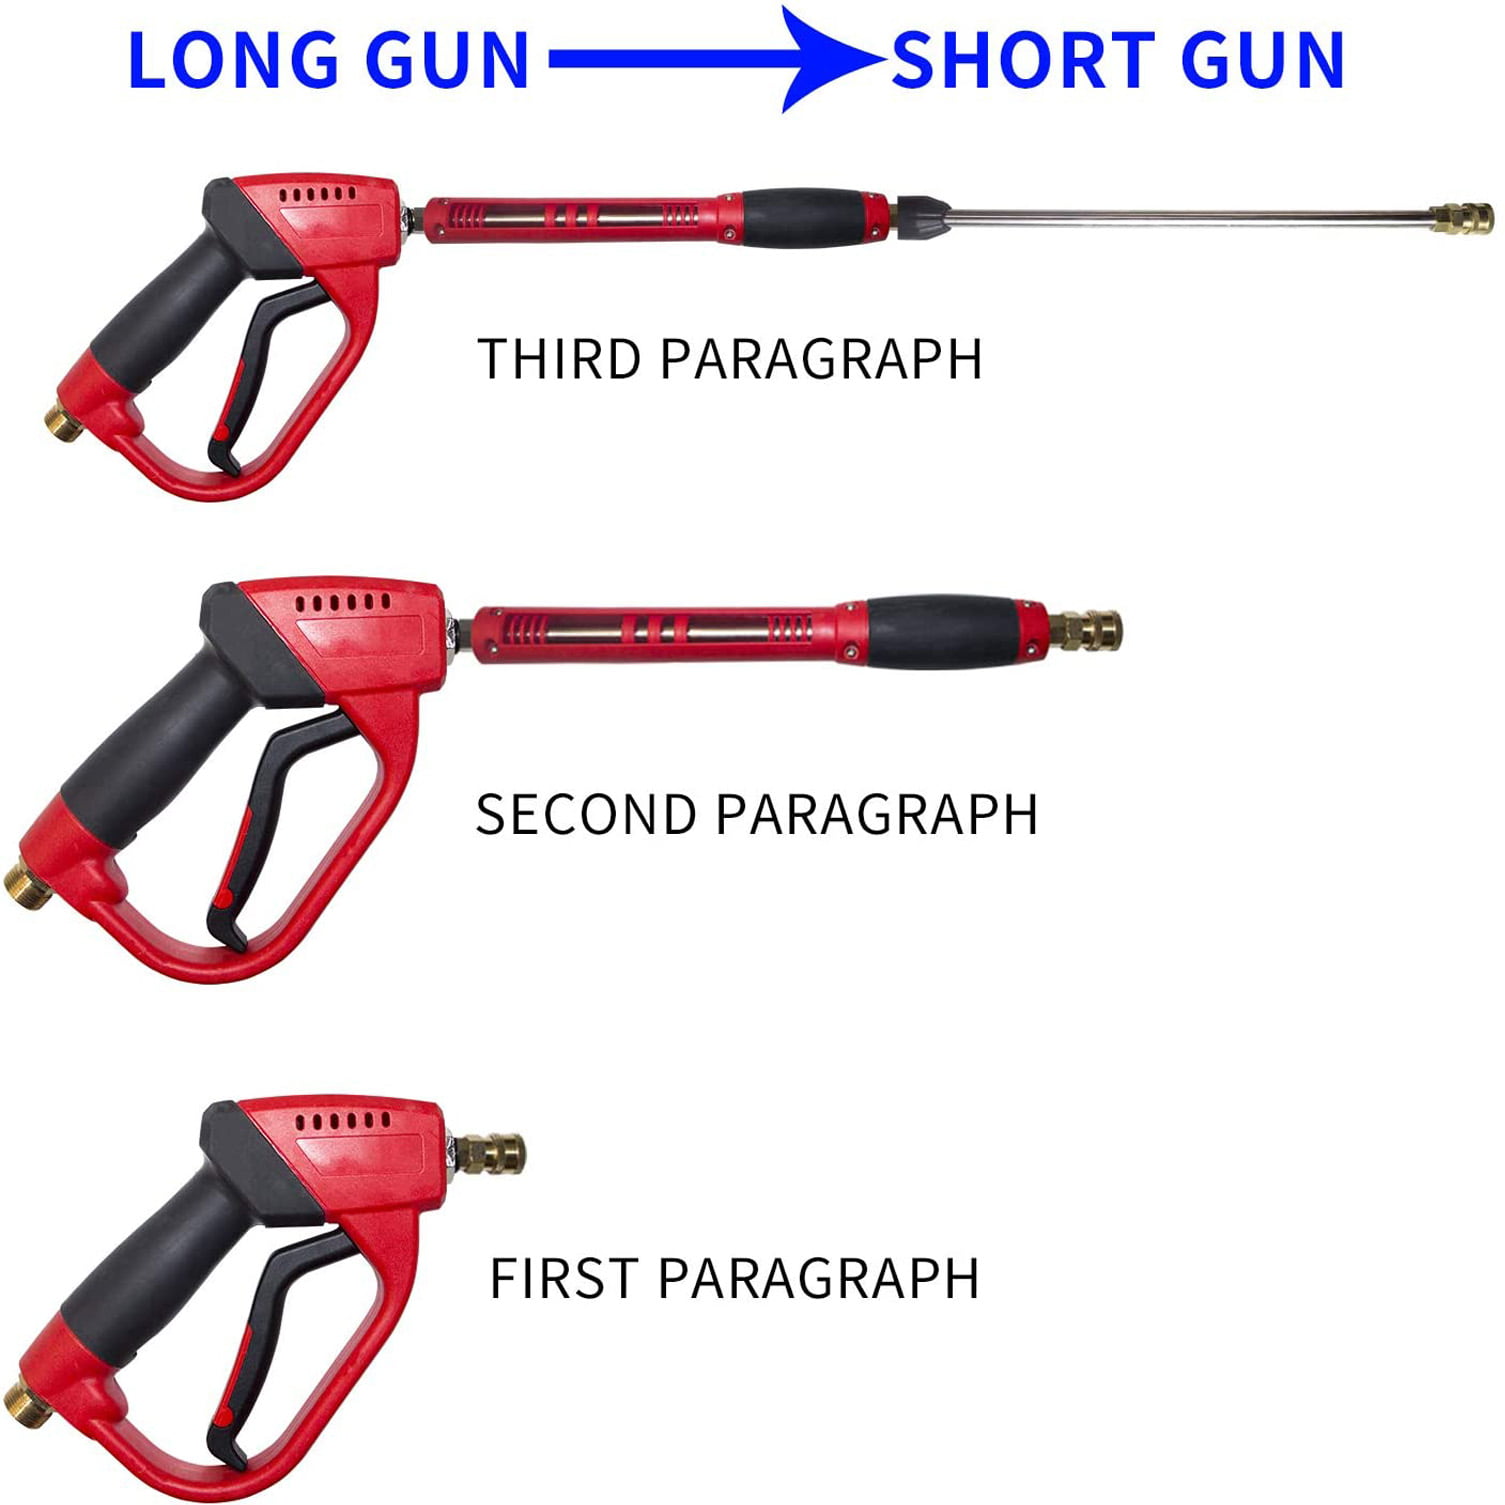 Pressure Washer Gun, Red High Power Washer Gun with Replacement Wand Extension, 5 Nozzle Tips, M22 Fittings, 40 Inch, 5000 PSI